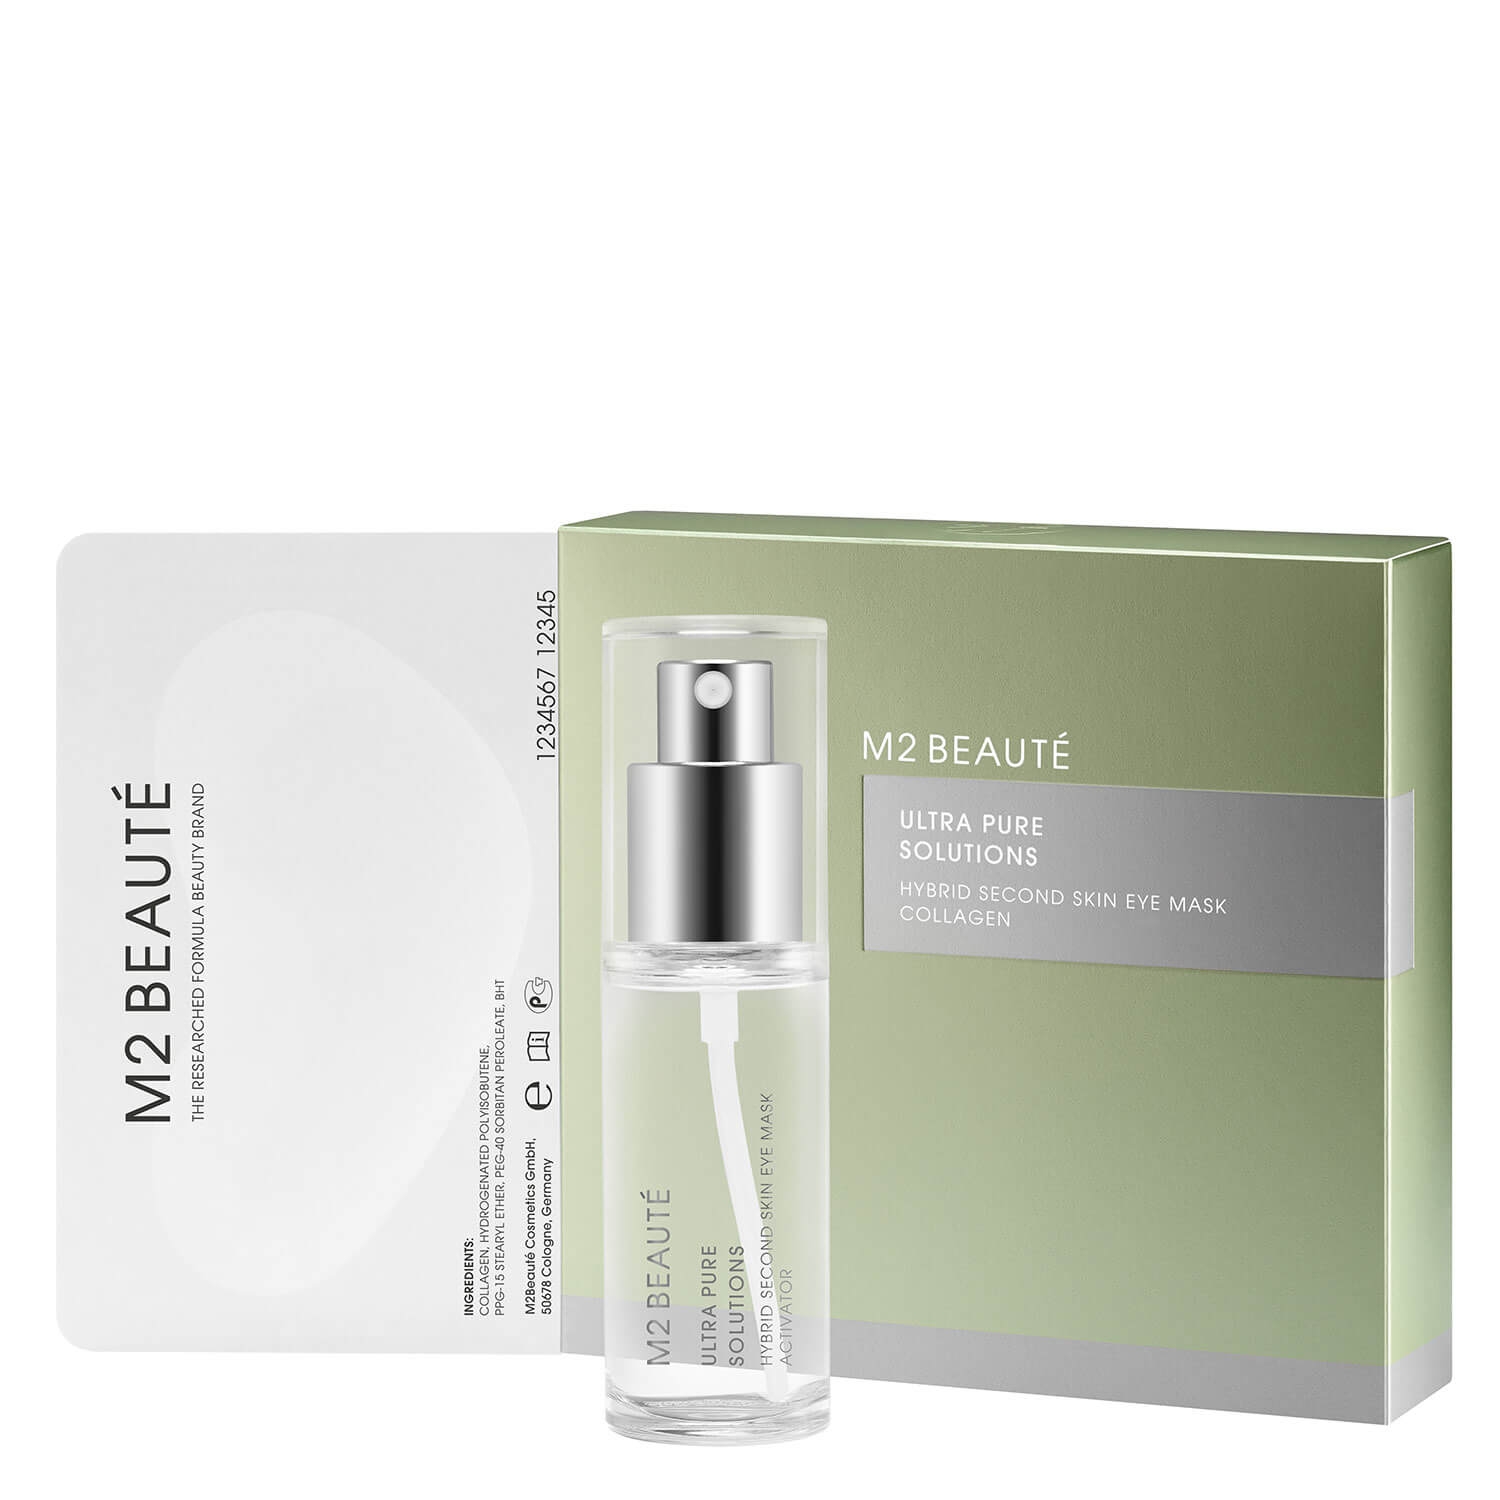 Product image from M2Beauté - Ultra Pure Solutions Hybrid Second Eye Mask Collagen